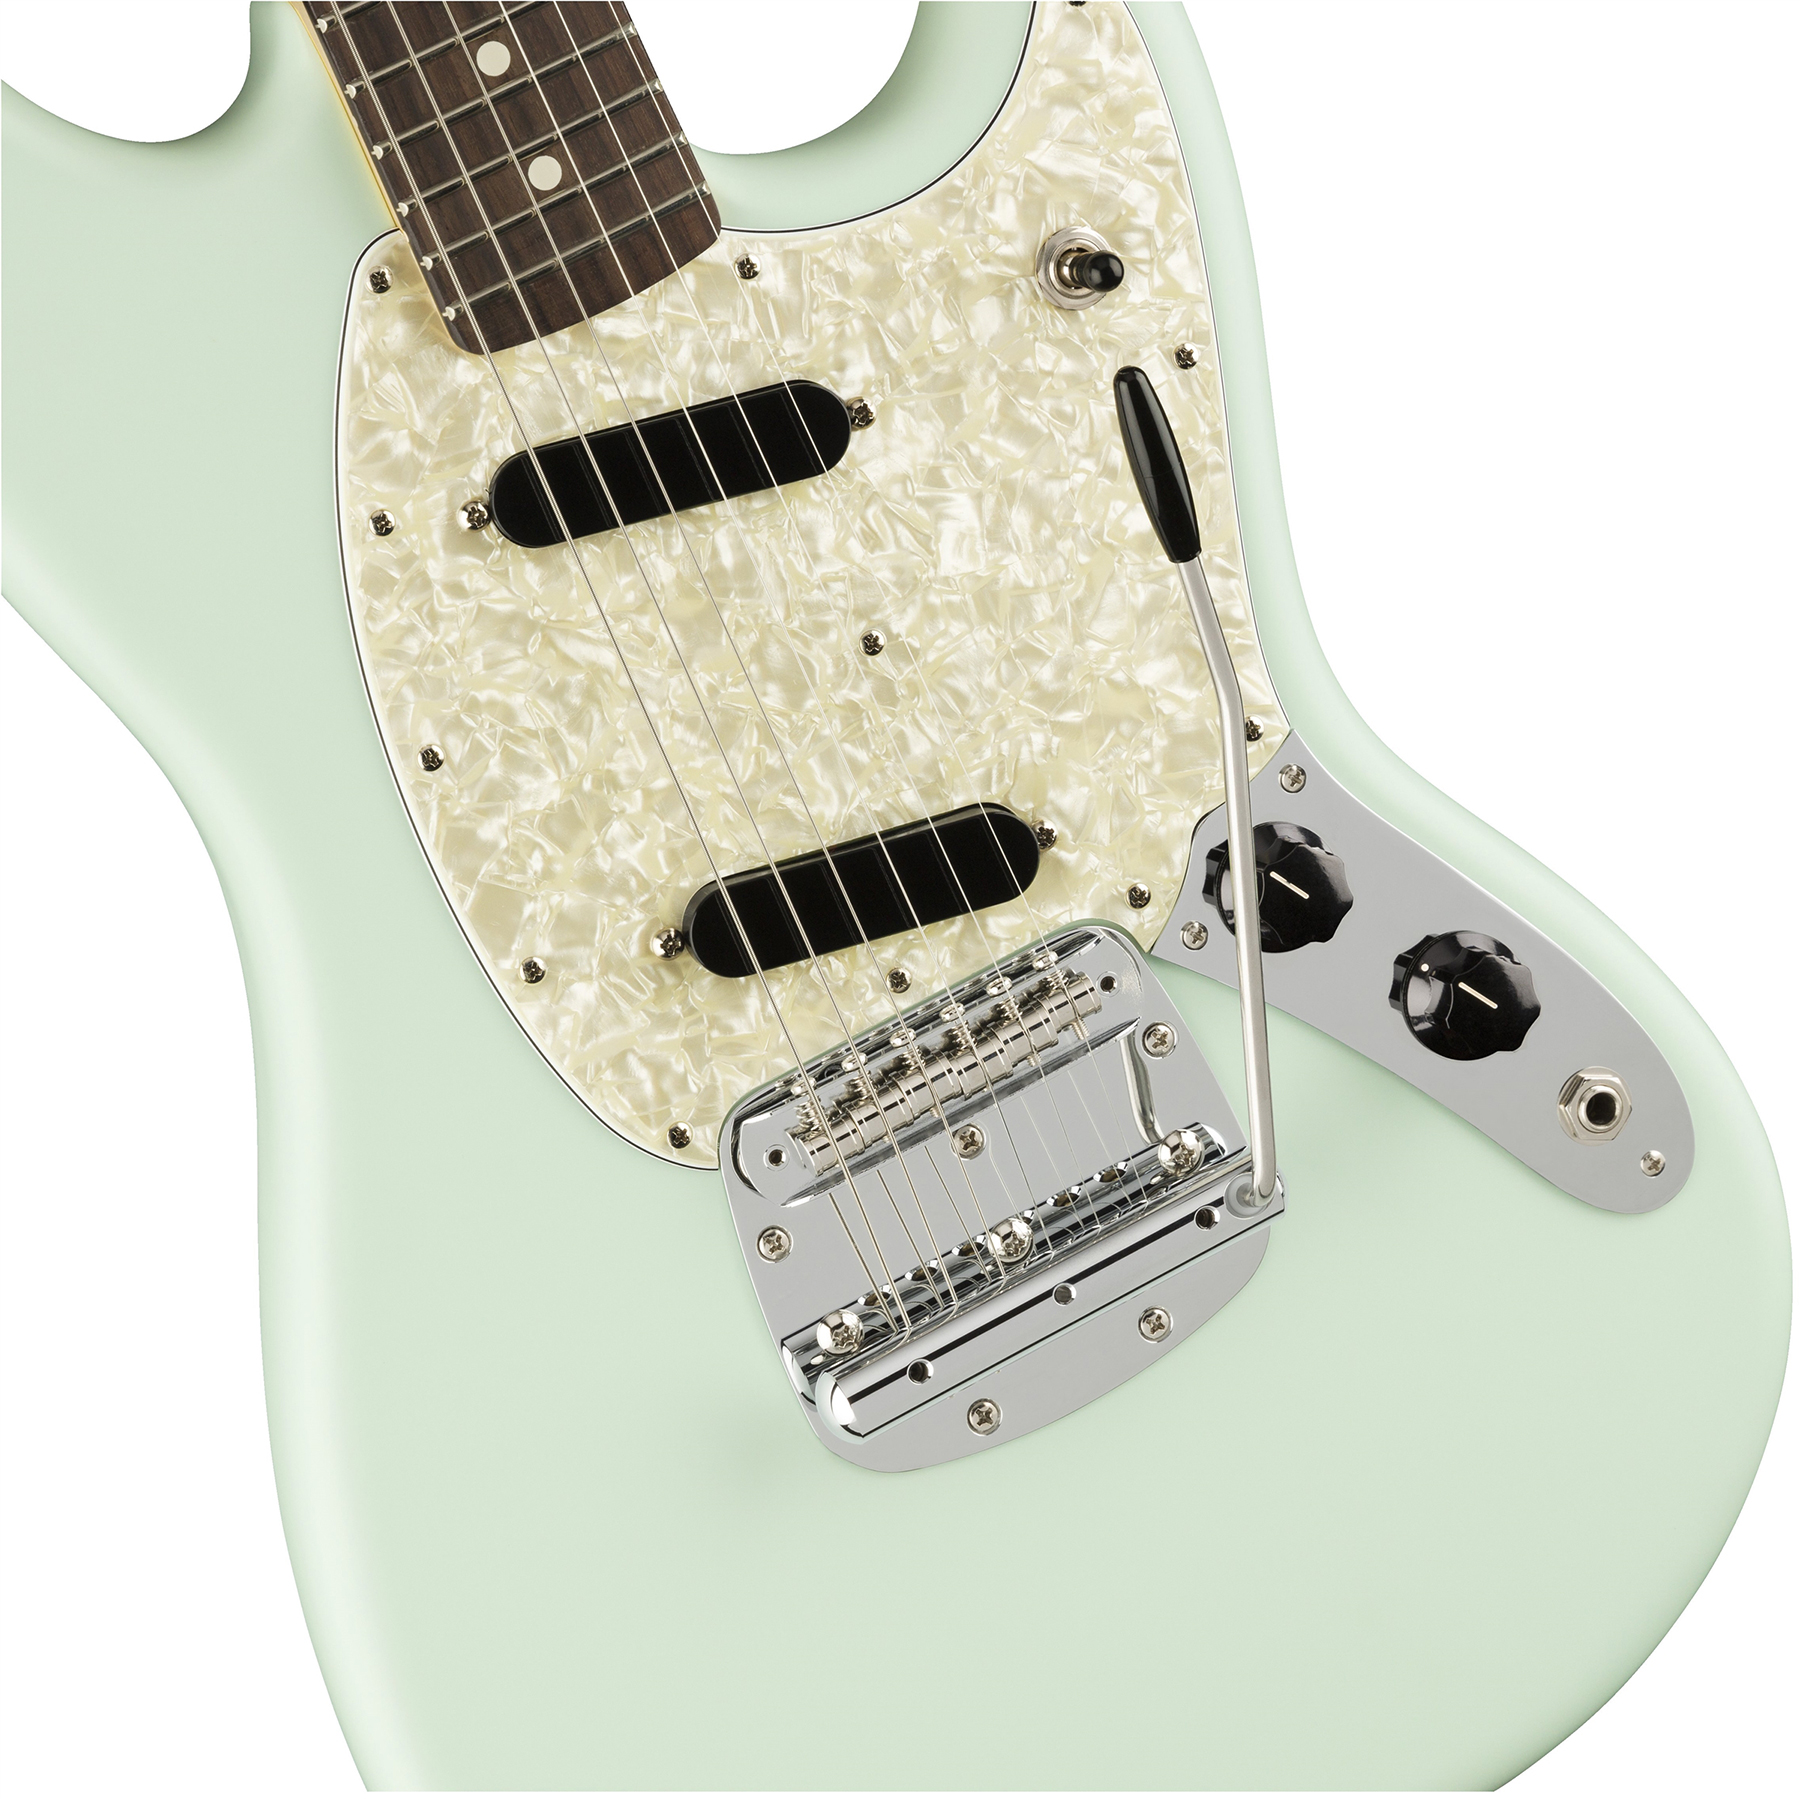 Fender Mustang American Performer Usa Ss Rw - Satin Sonic Blue - Double cut electric guitar - Variation 2